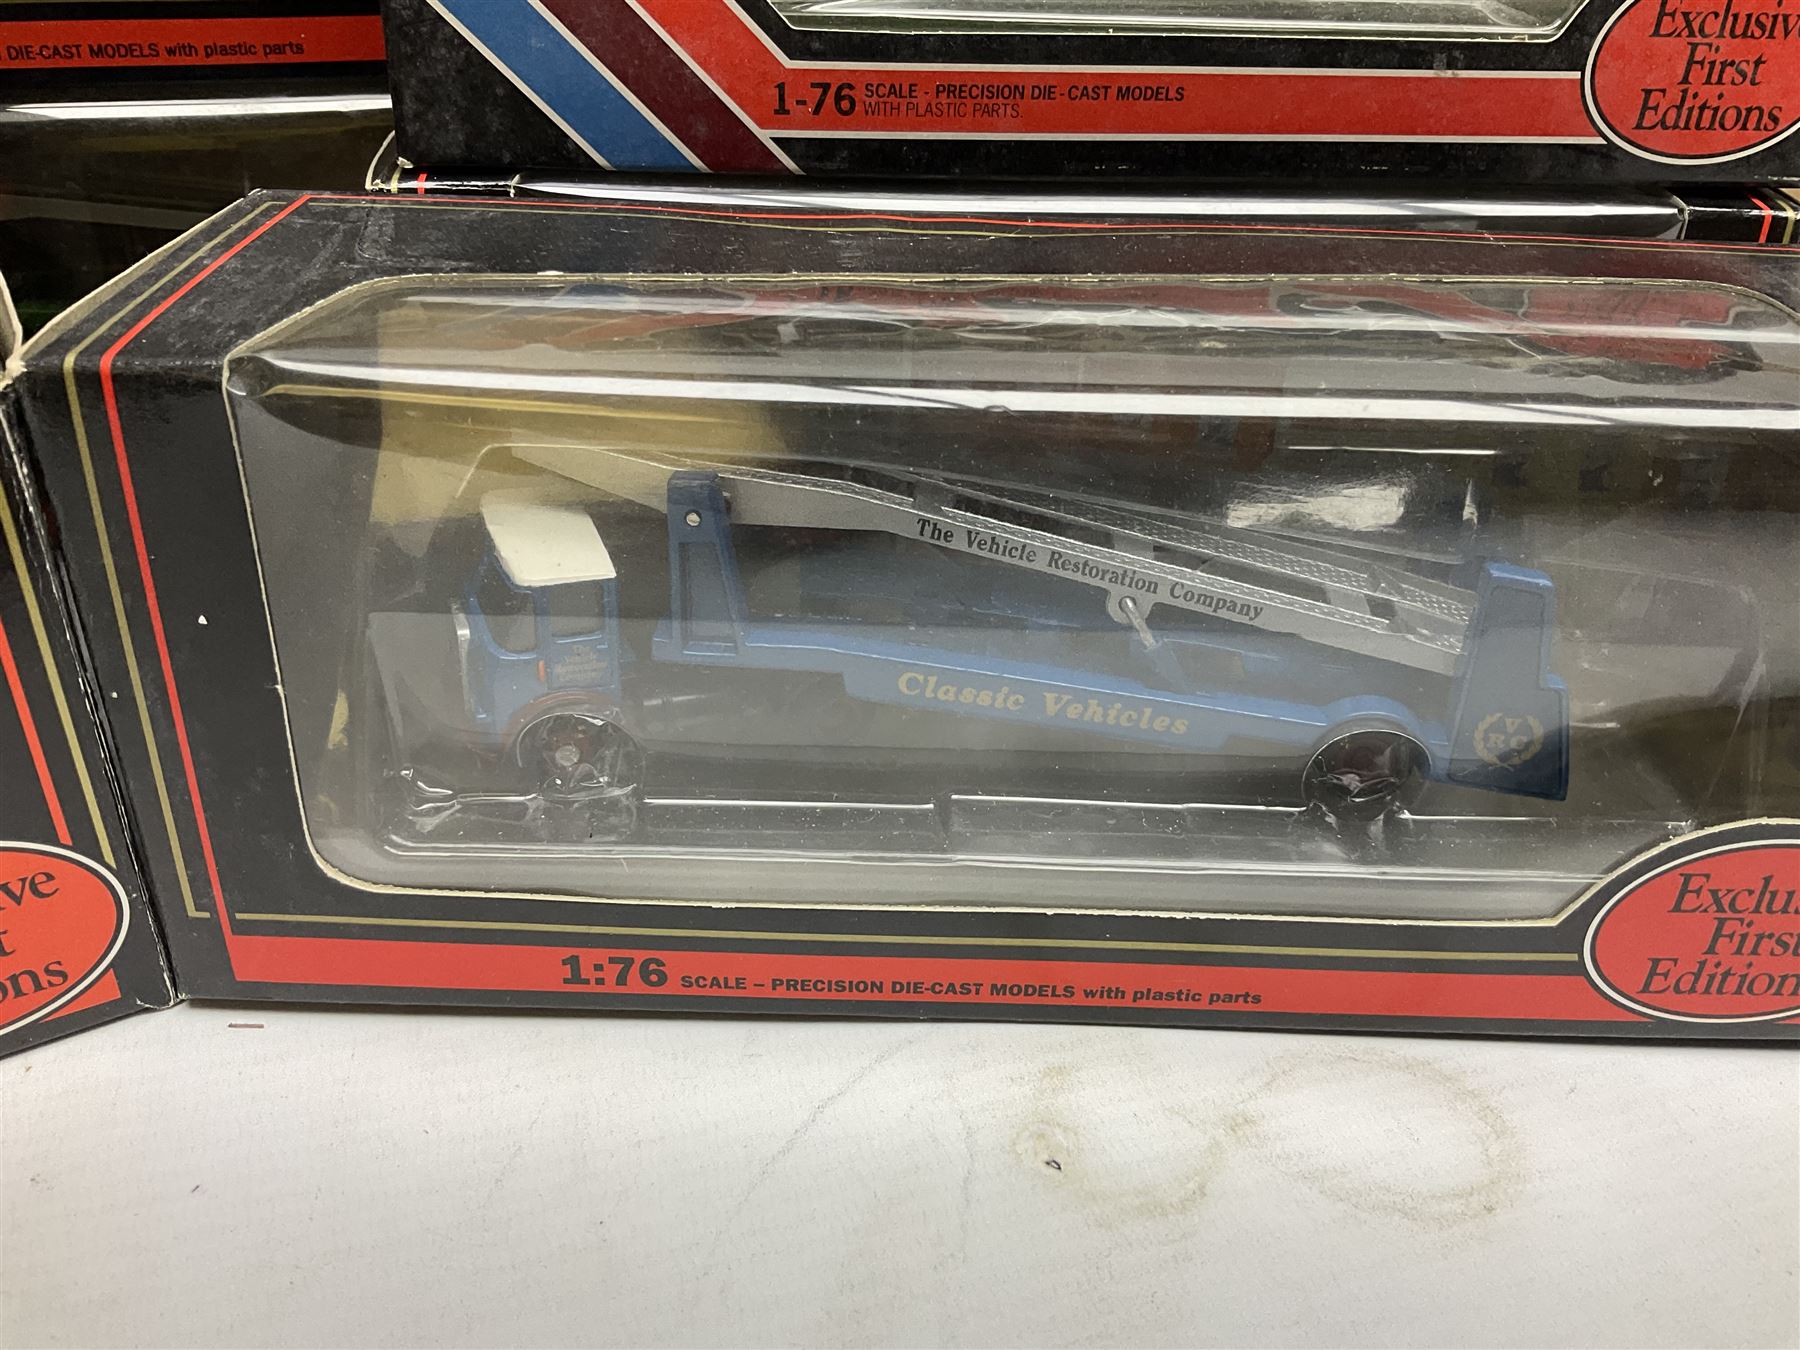 Ten Exclusive First Editions 1:76 scale die-cast models - Image 3 of 7